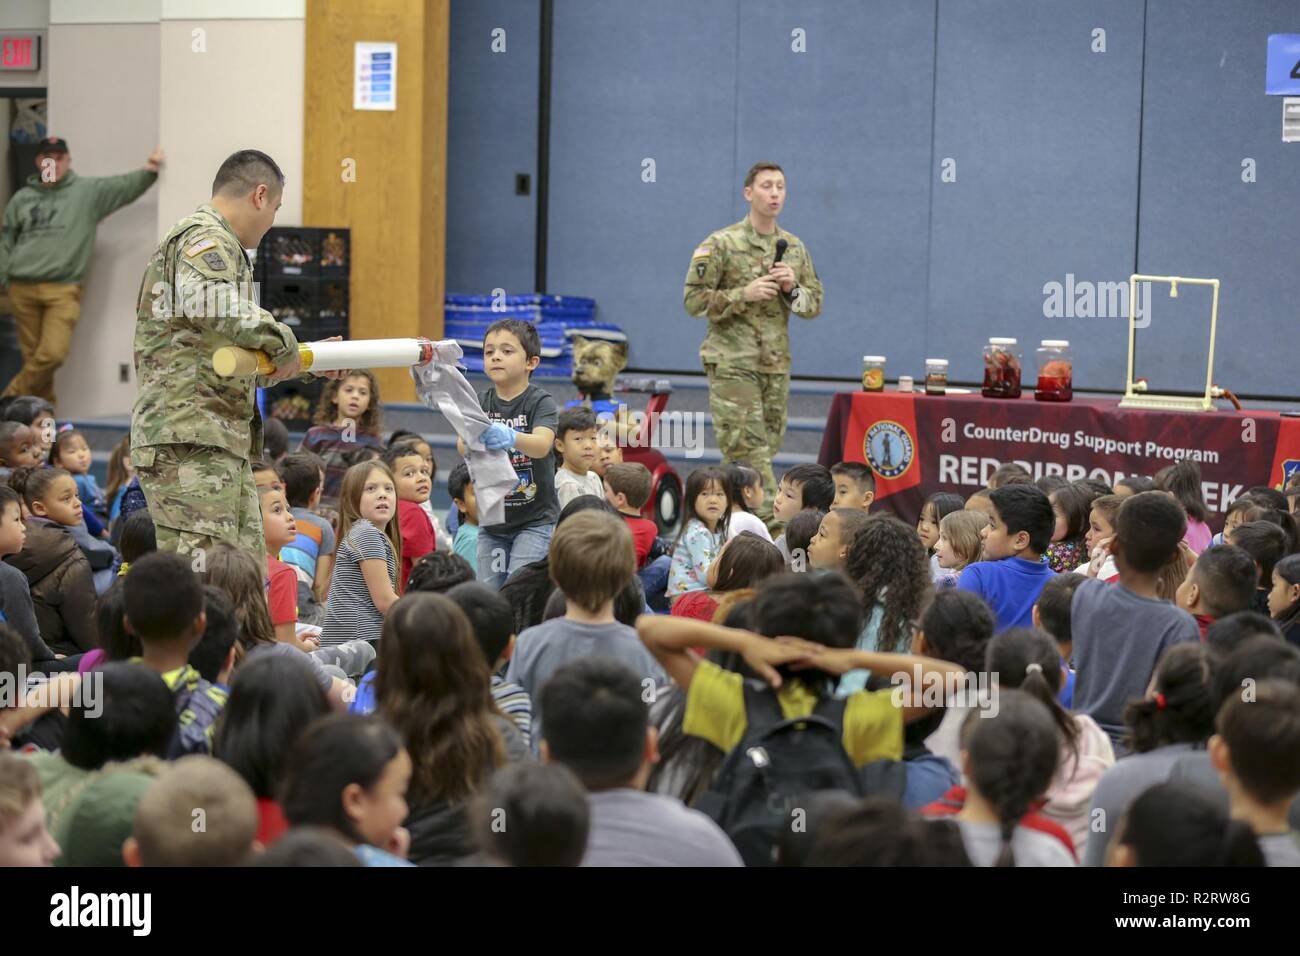 Sgt. 1st Class Oliver Meza, Army National Guard drug testing coordinator, and his student assistant display a 5-foot fake cigarette with a list of up to 7,000 chemicals in cigarettes that are harmful during a Red Ribbon Week drug free celebration at Muldoon Elementary School, October 29, 2018.  The event brought multiple law enforcement agencies together to promote a healthy and drug-free lifestyle by greeting students upon arrival at school, static displays of military and police vehicles, and a drug free message. Stock Photo